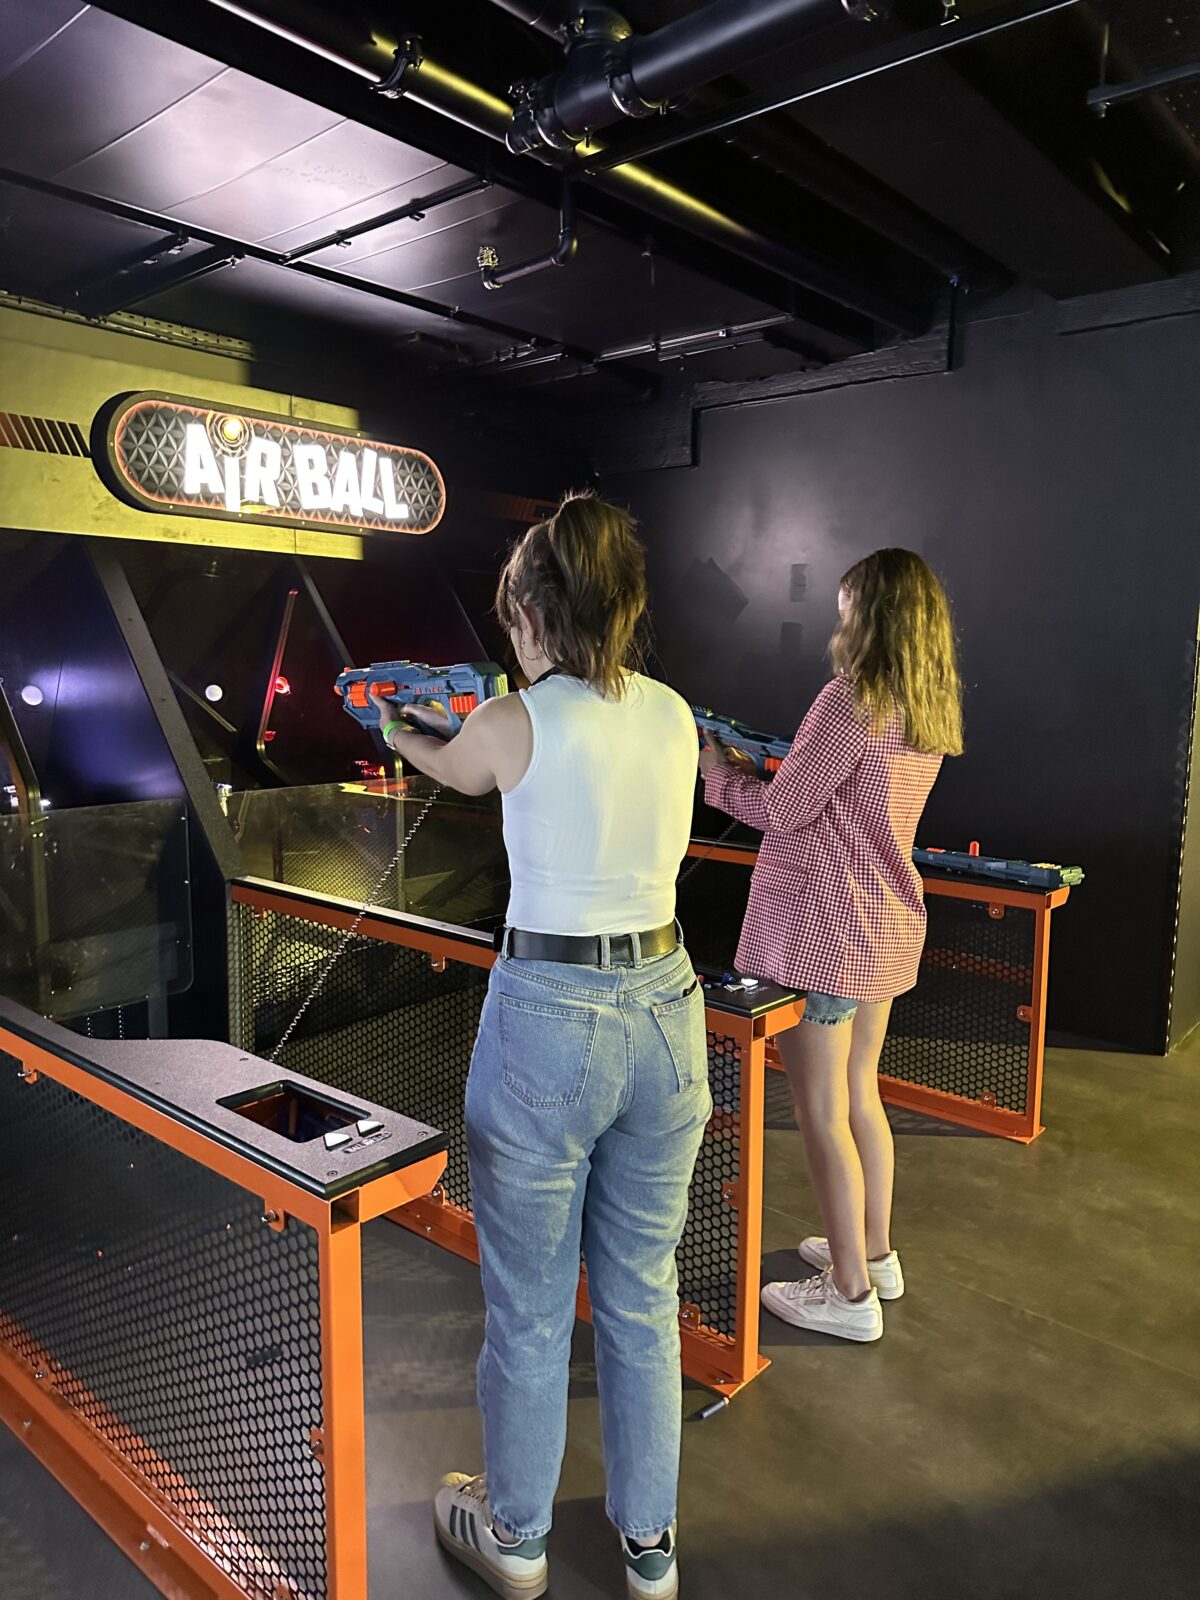 Nerf Action Experience at Trafford Palazzo, Greater Manchester